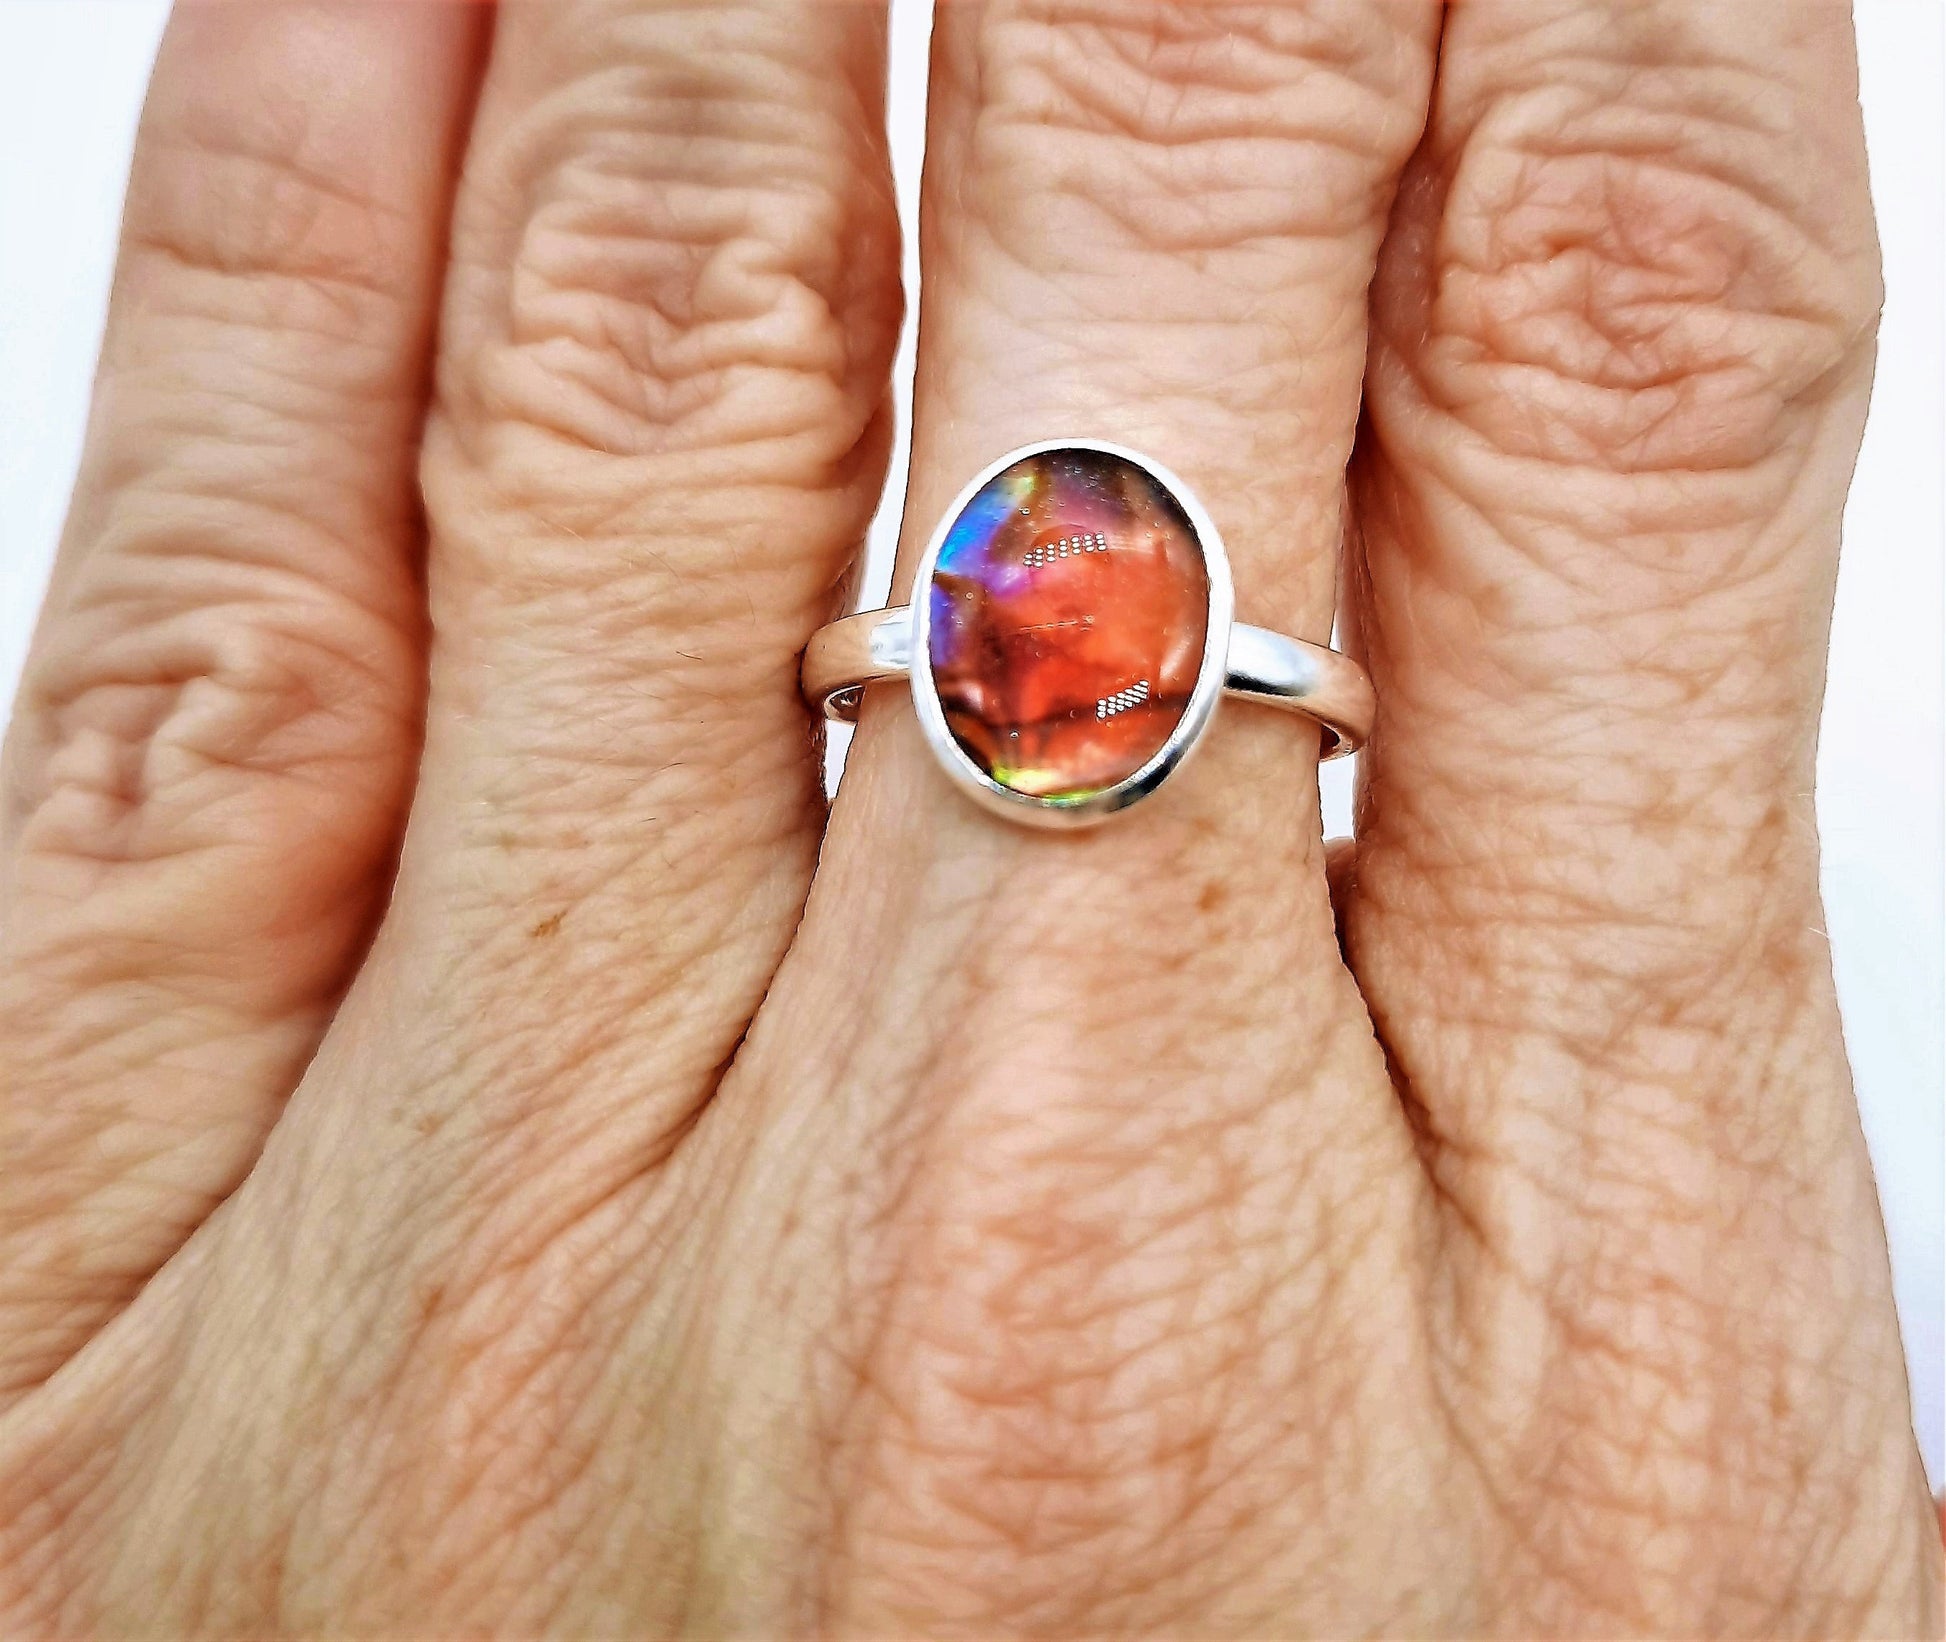 Handmade / Handcrafted 925 Sterling Silver Natural Pink Abalone / Paua Seashell Ring, Oval, Sealed with Holographic Mica Infused Resin